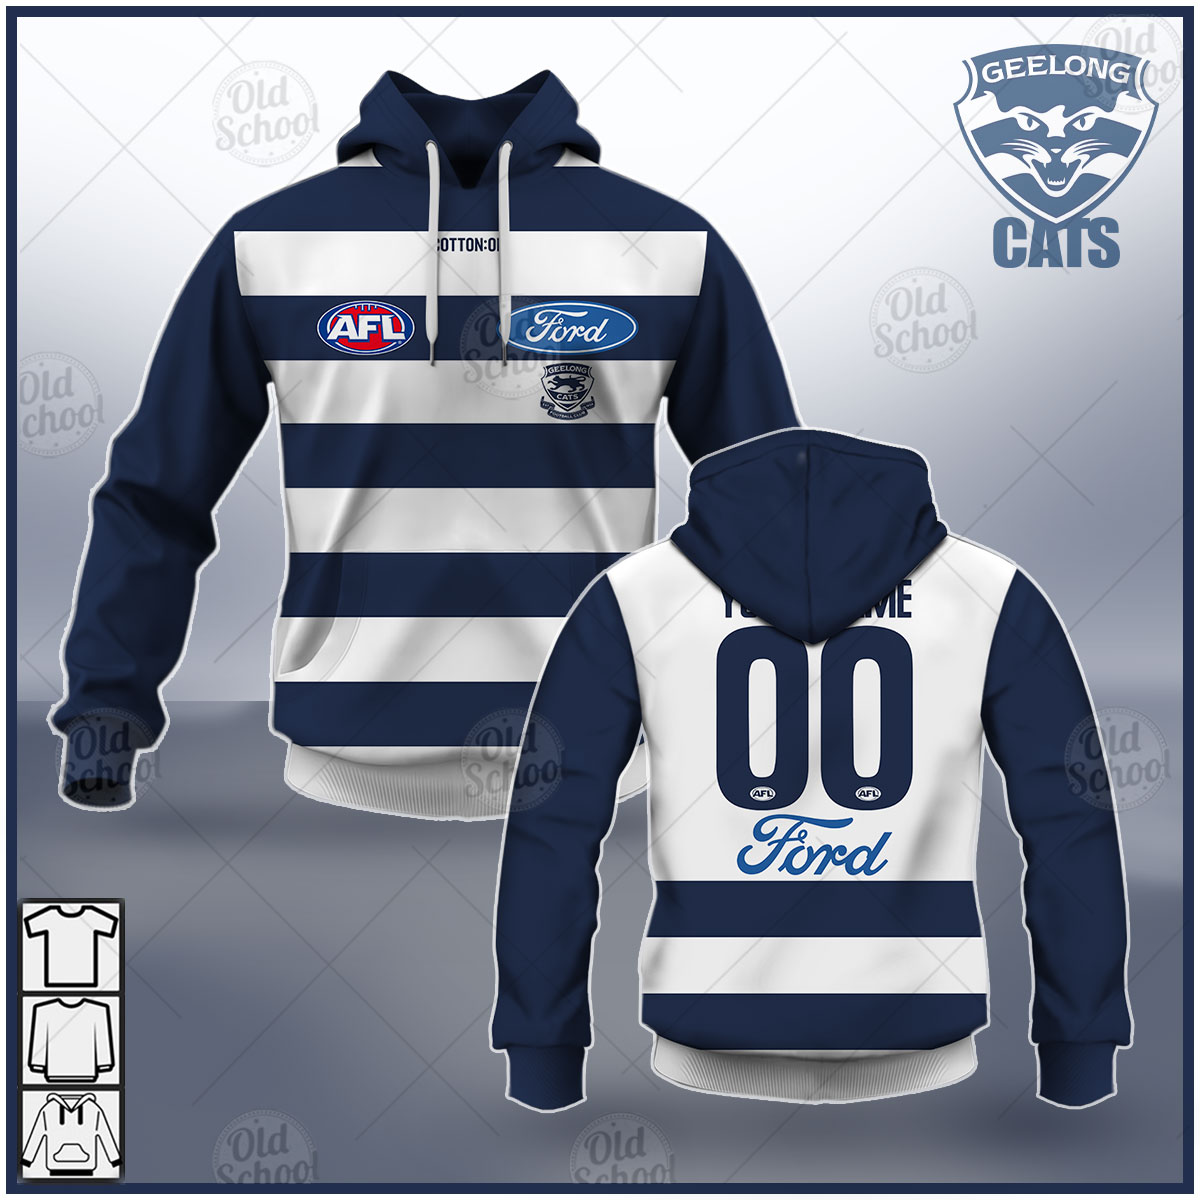 Details about   Geelong Cats 2018 AFL Home Guernsey Sizes S-5XL BNWT 